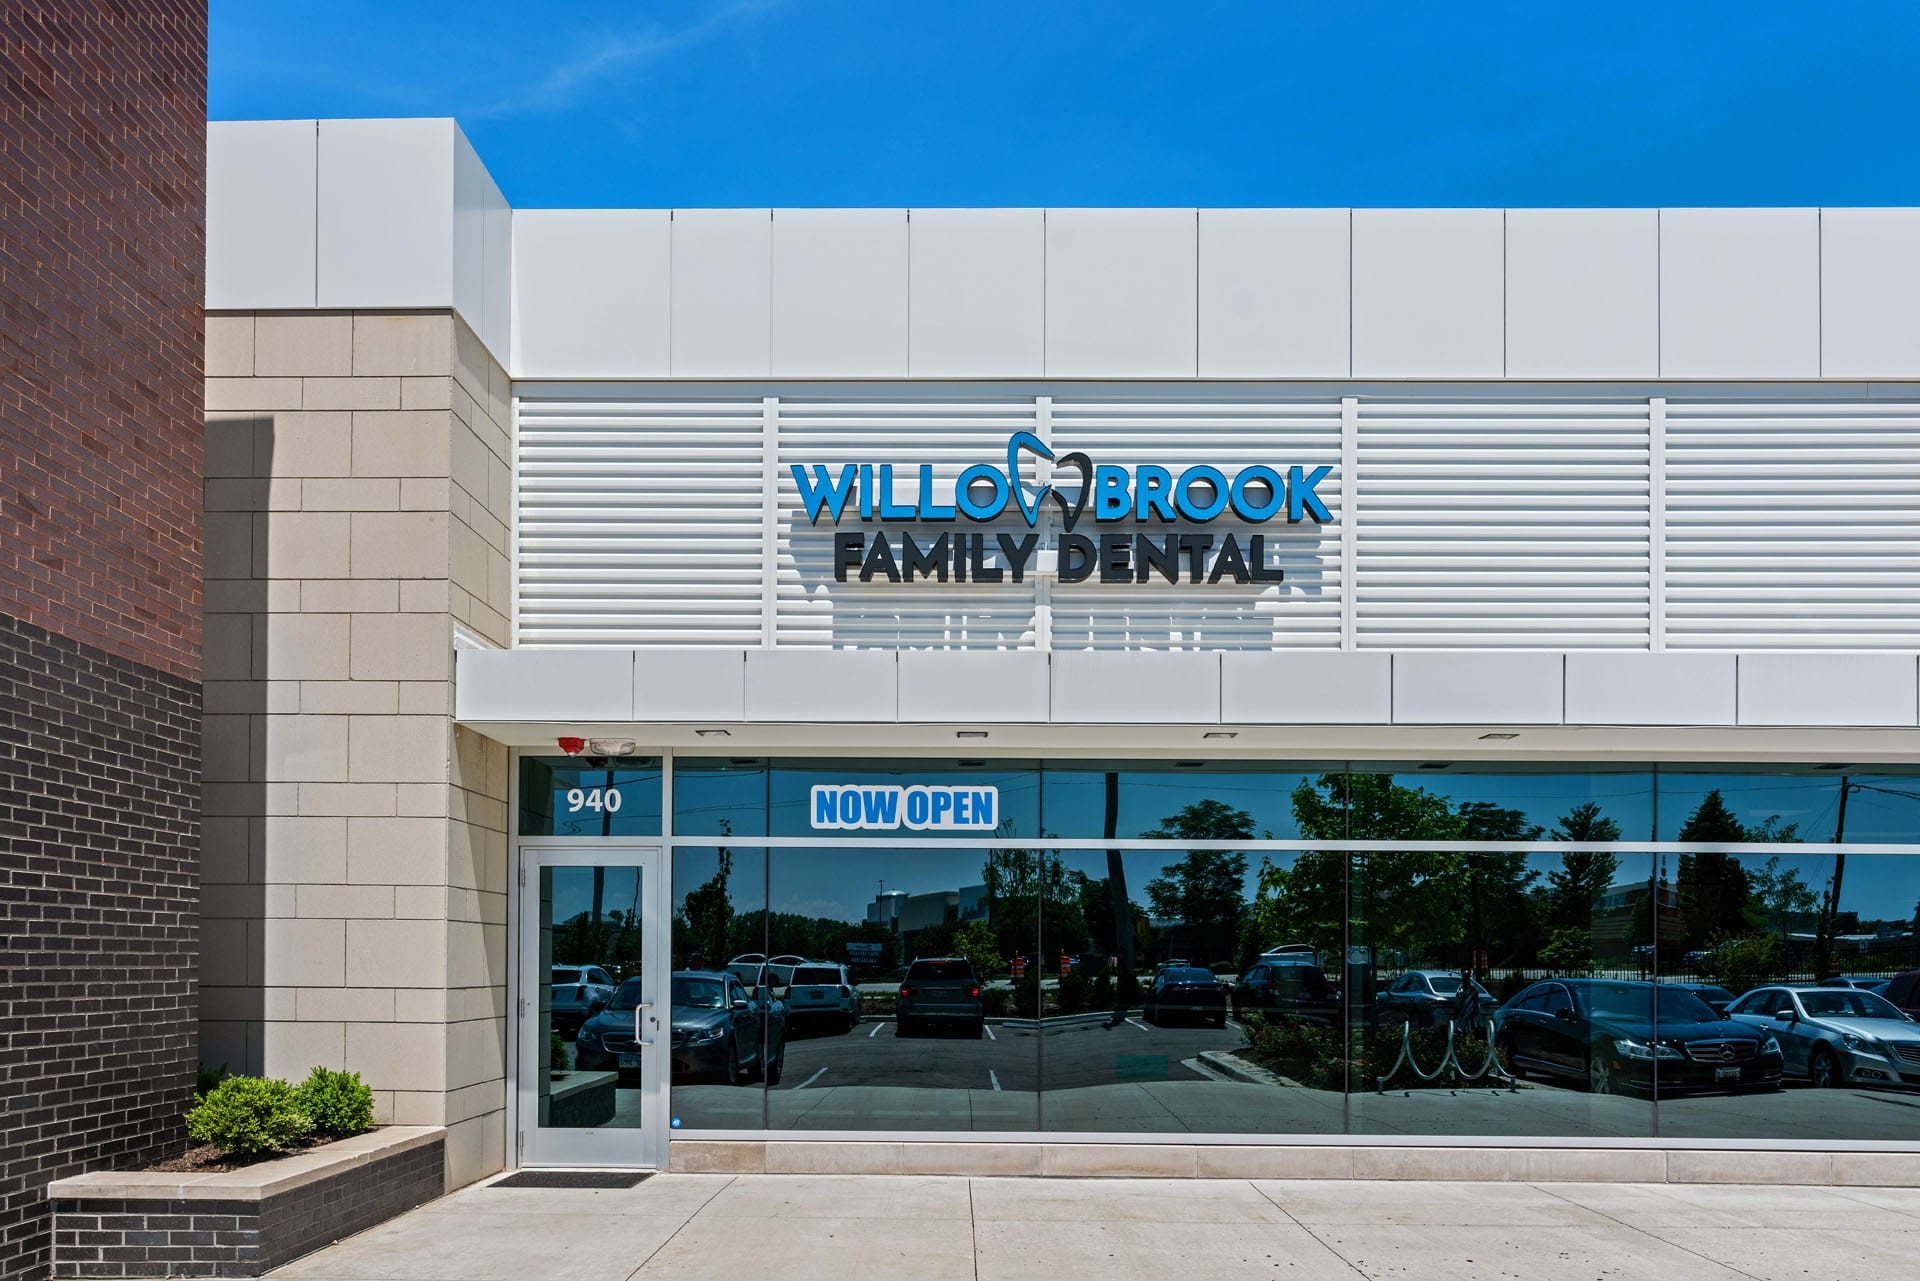 Family Dentistry in Willowbrook, IL